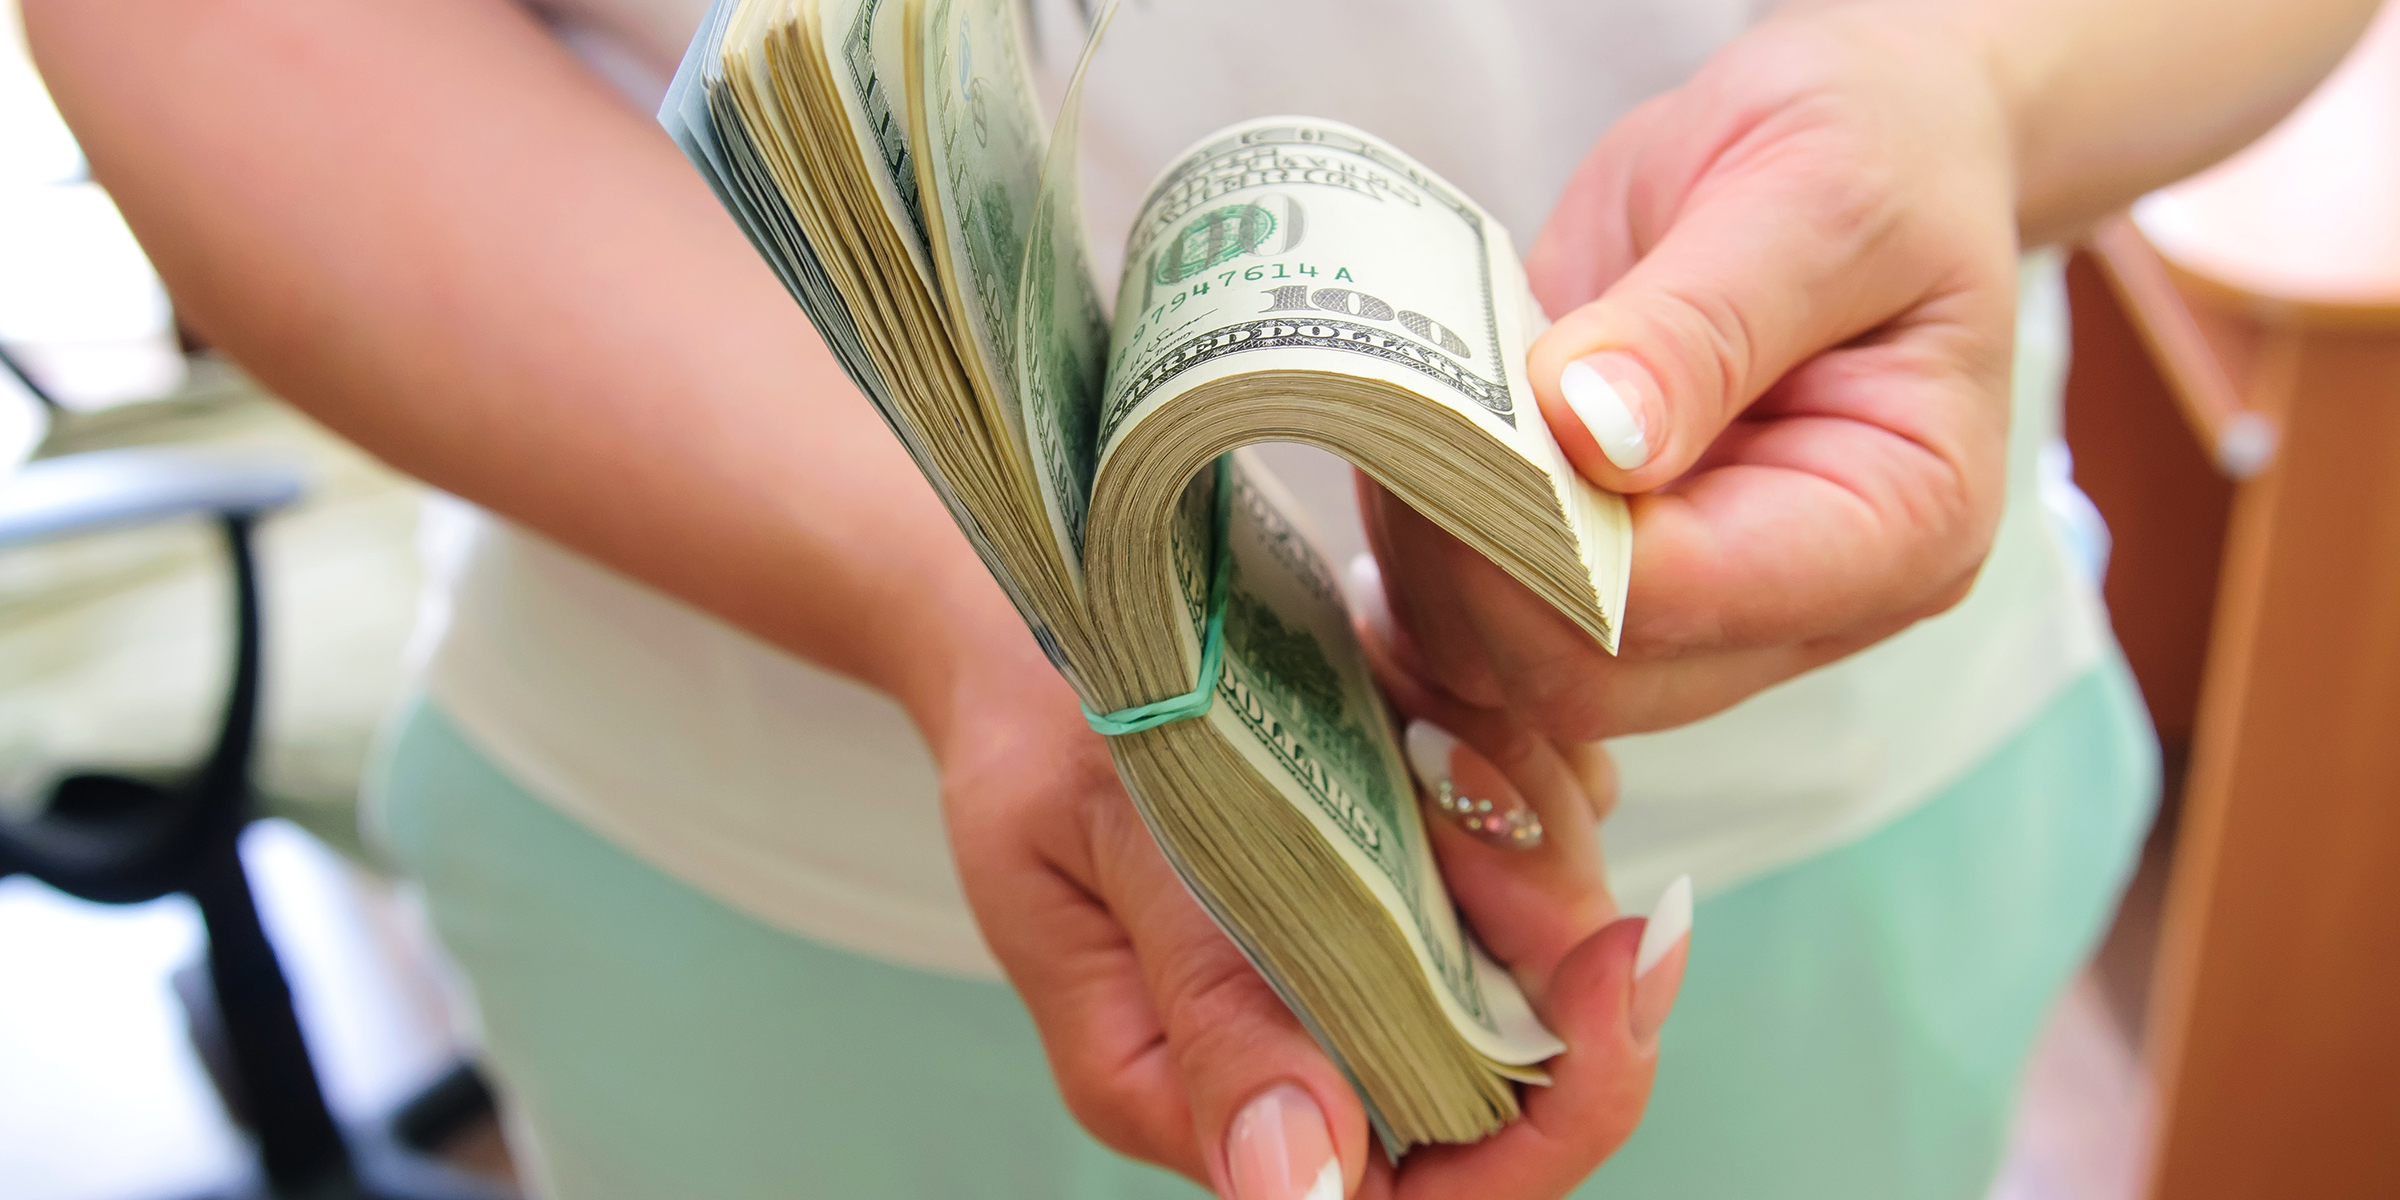 A woman holding a wad of cash | Source: Shutterstock